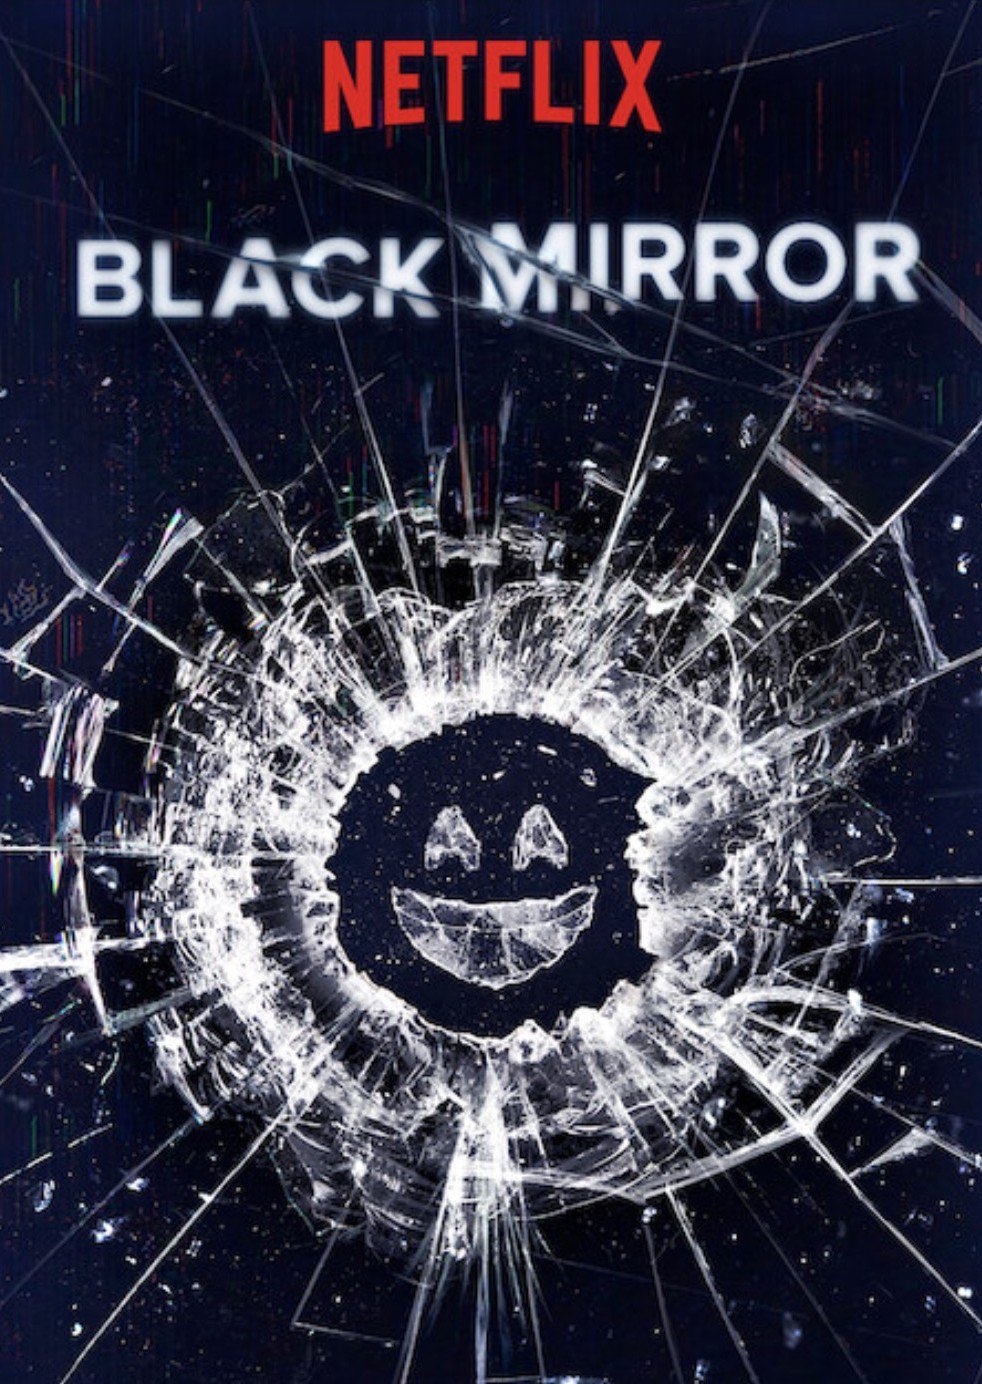 Black Mirror season 6: Who is in the cast?